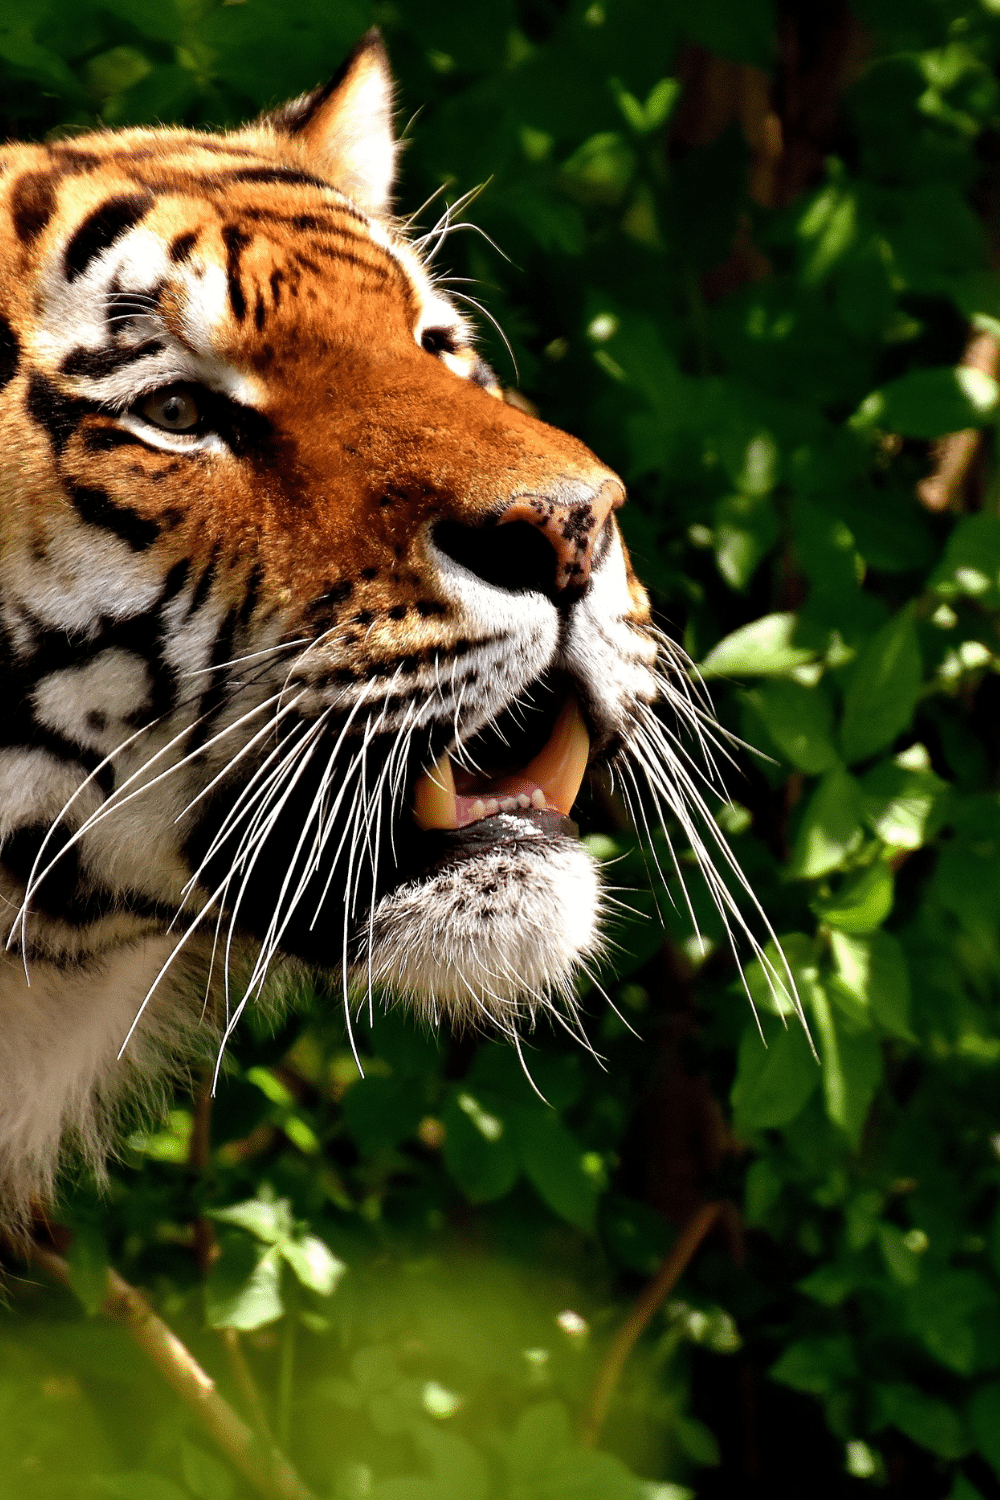 Close up photo of a tiger's head from the side